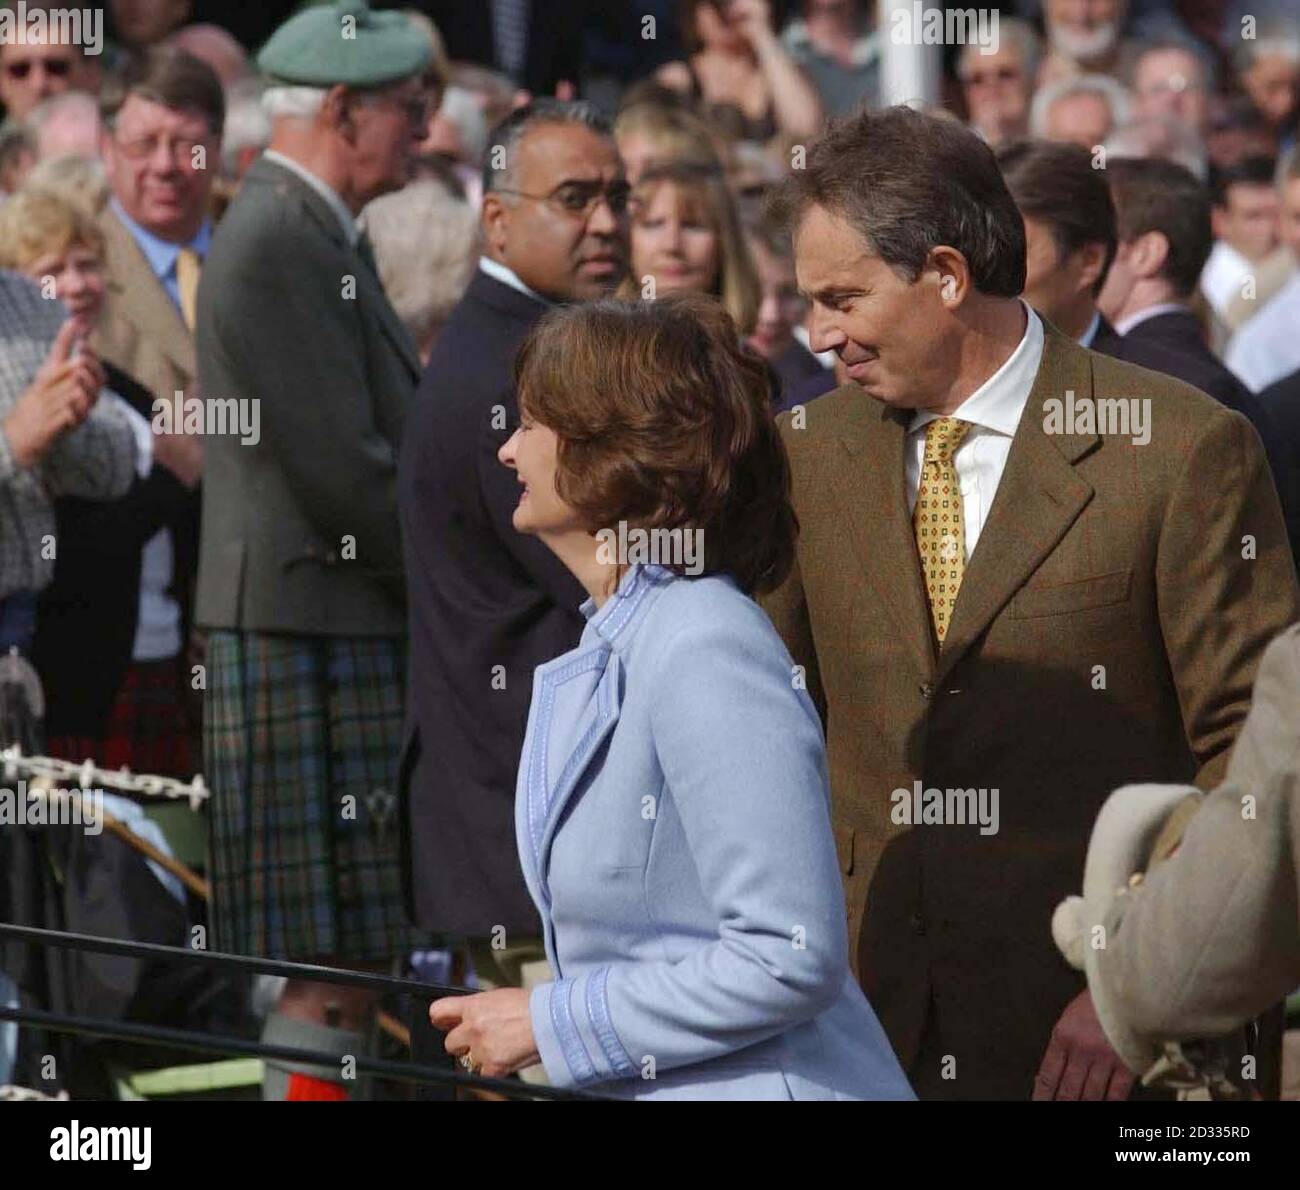 Prime Minister Tony Blair and wife  Cherie arrive at the Braemar Royal Highland Games, in Aberdeenshire.   *  The pair joined Queen Elizabeth and the Duke of Edinburgh to watch the annual event which has a history stretching back to the days of King Malcolm Canmore, 900 years ago. Stock Photo